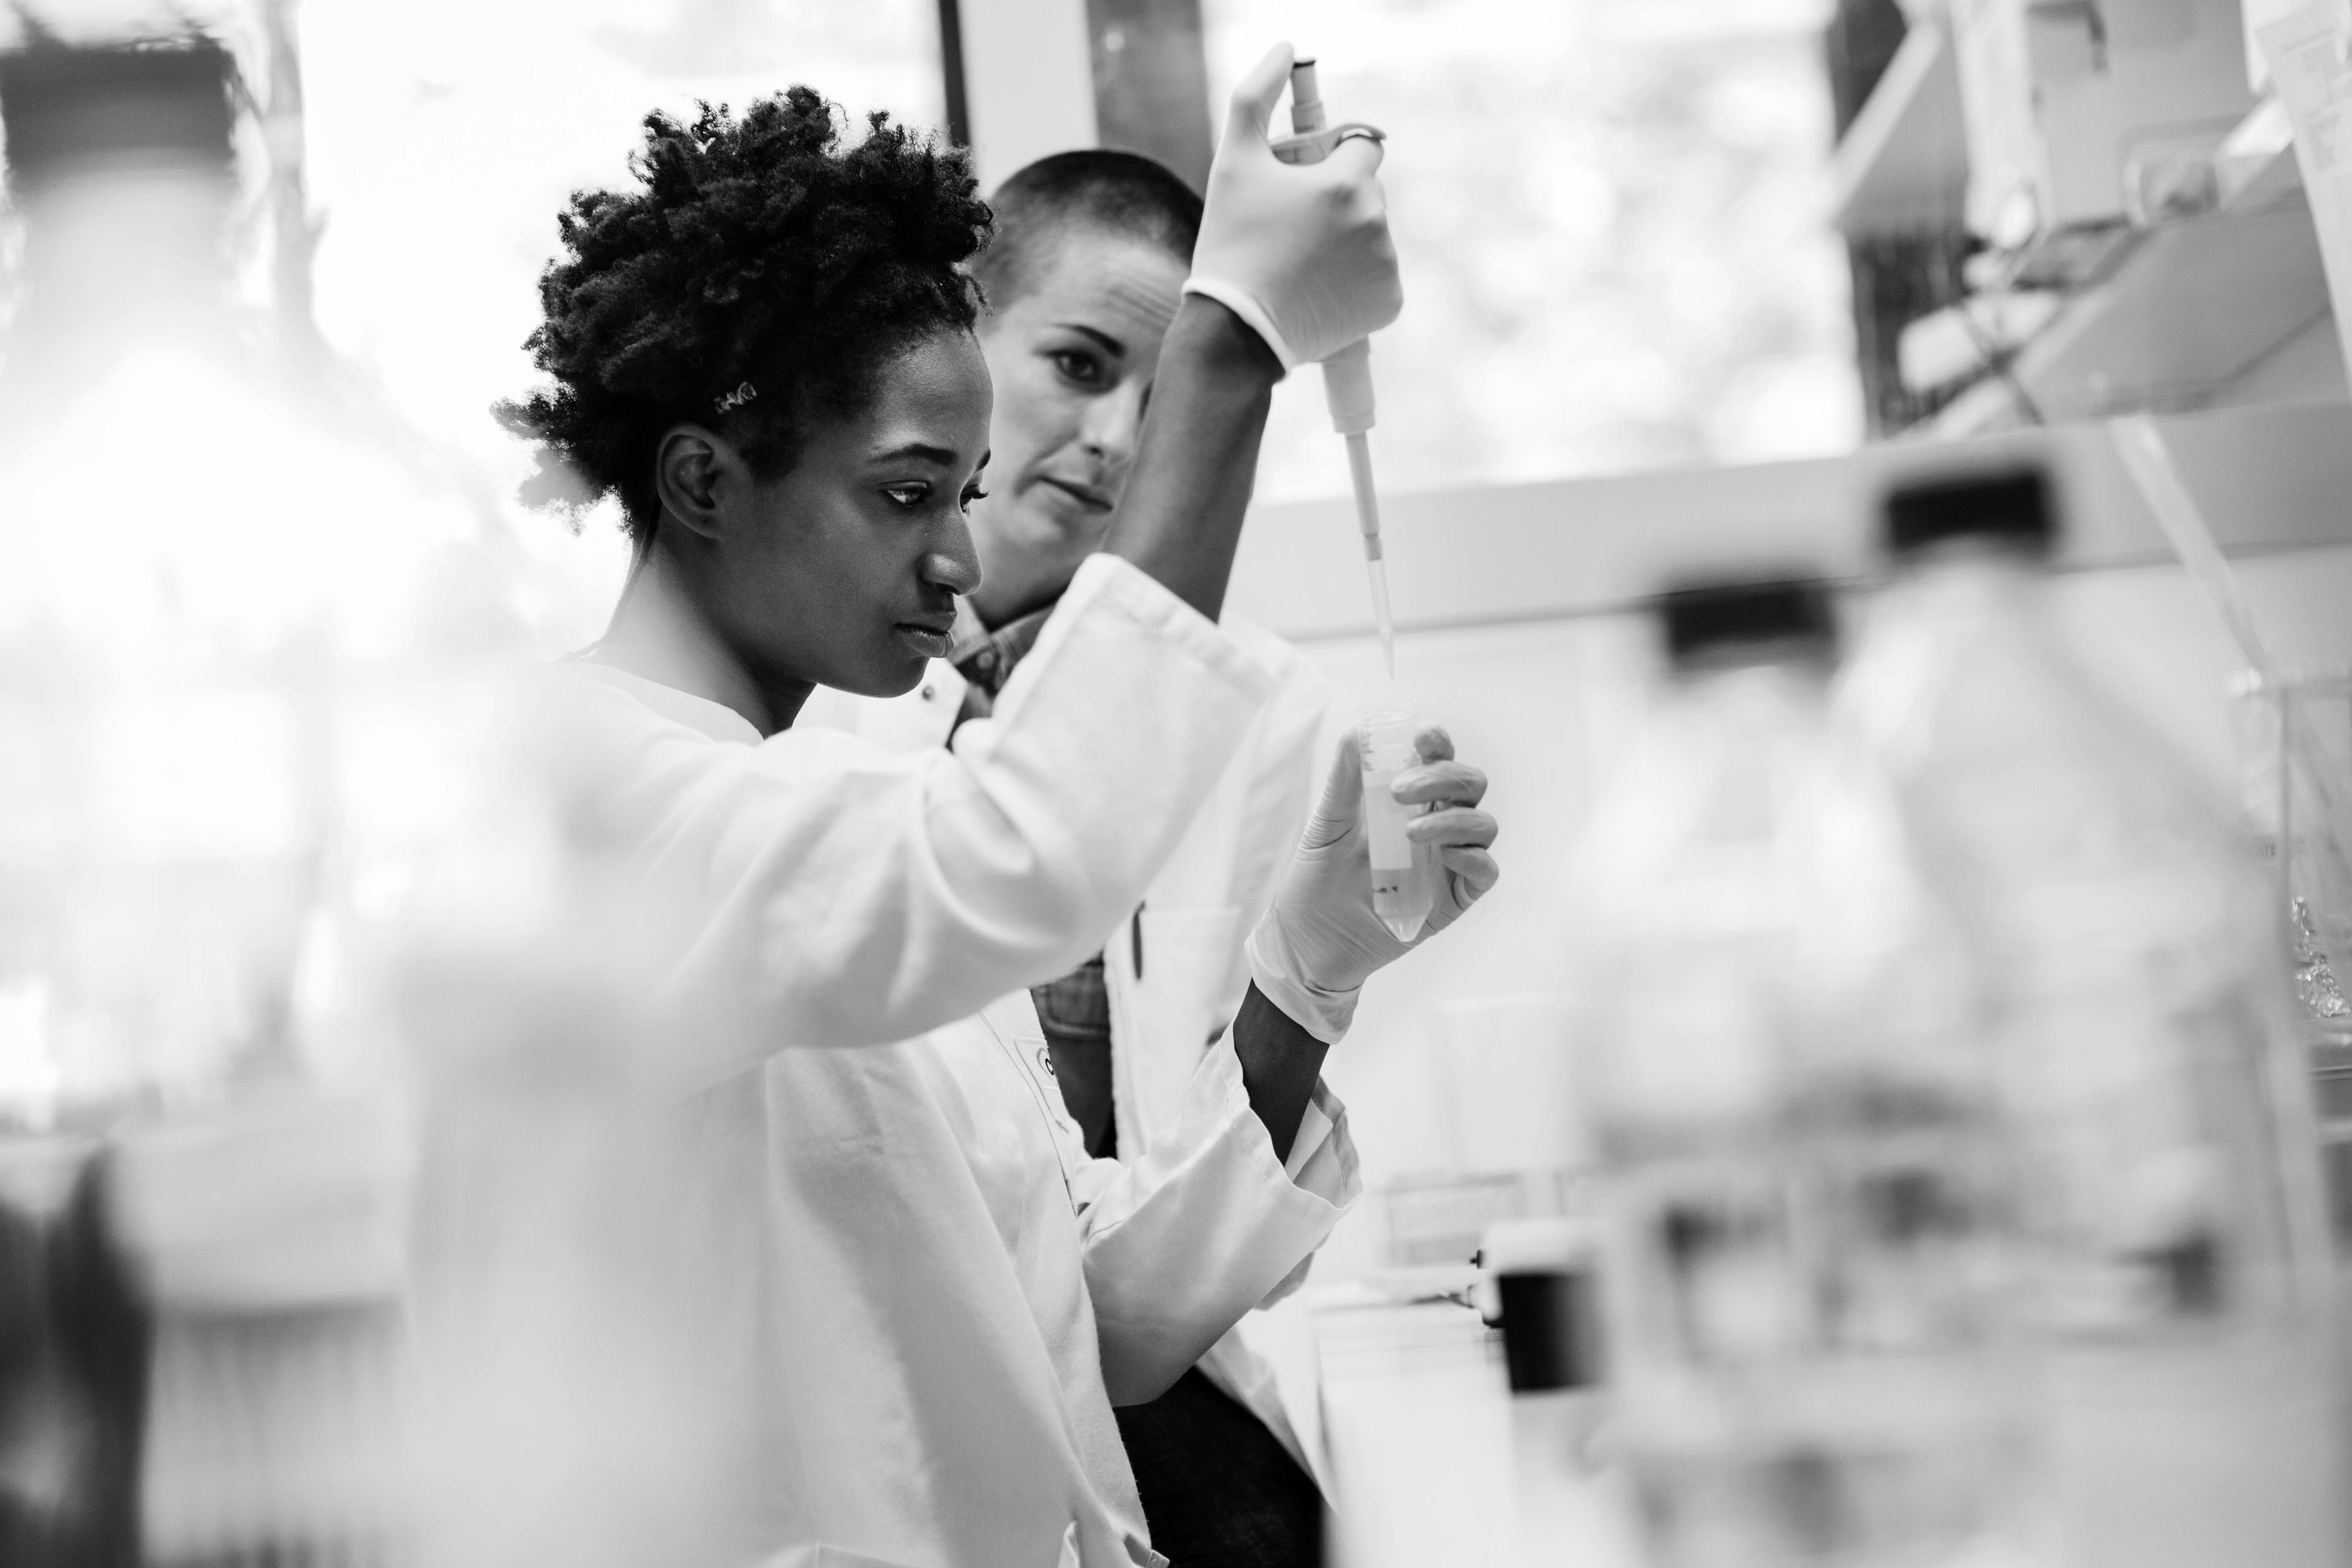 Two female scientists working together in a research laboratory.